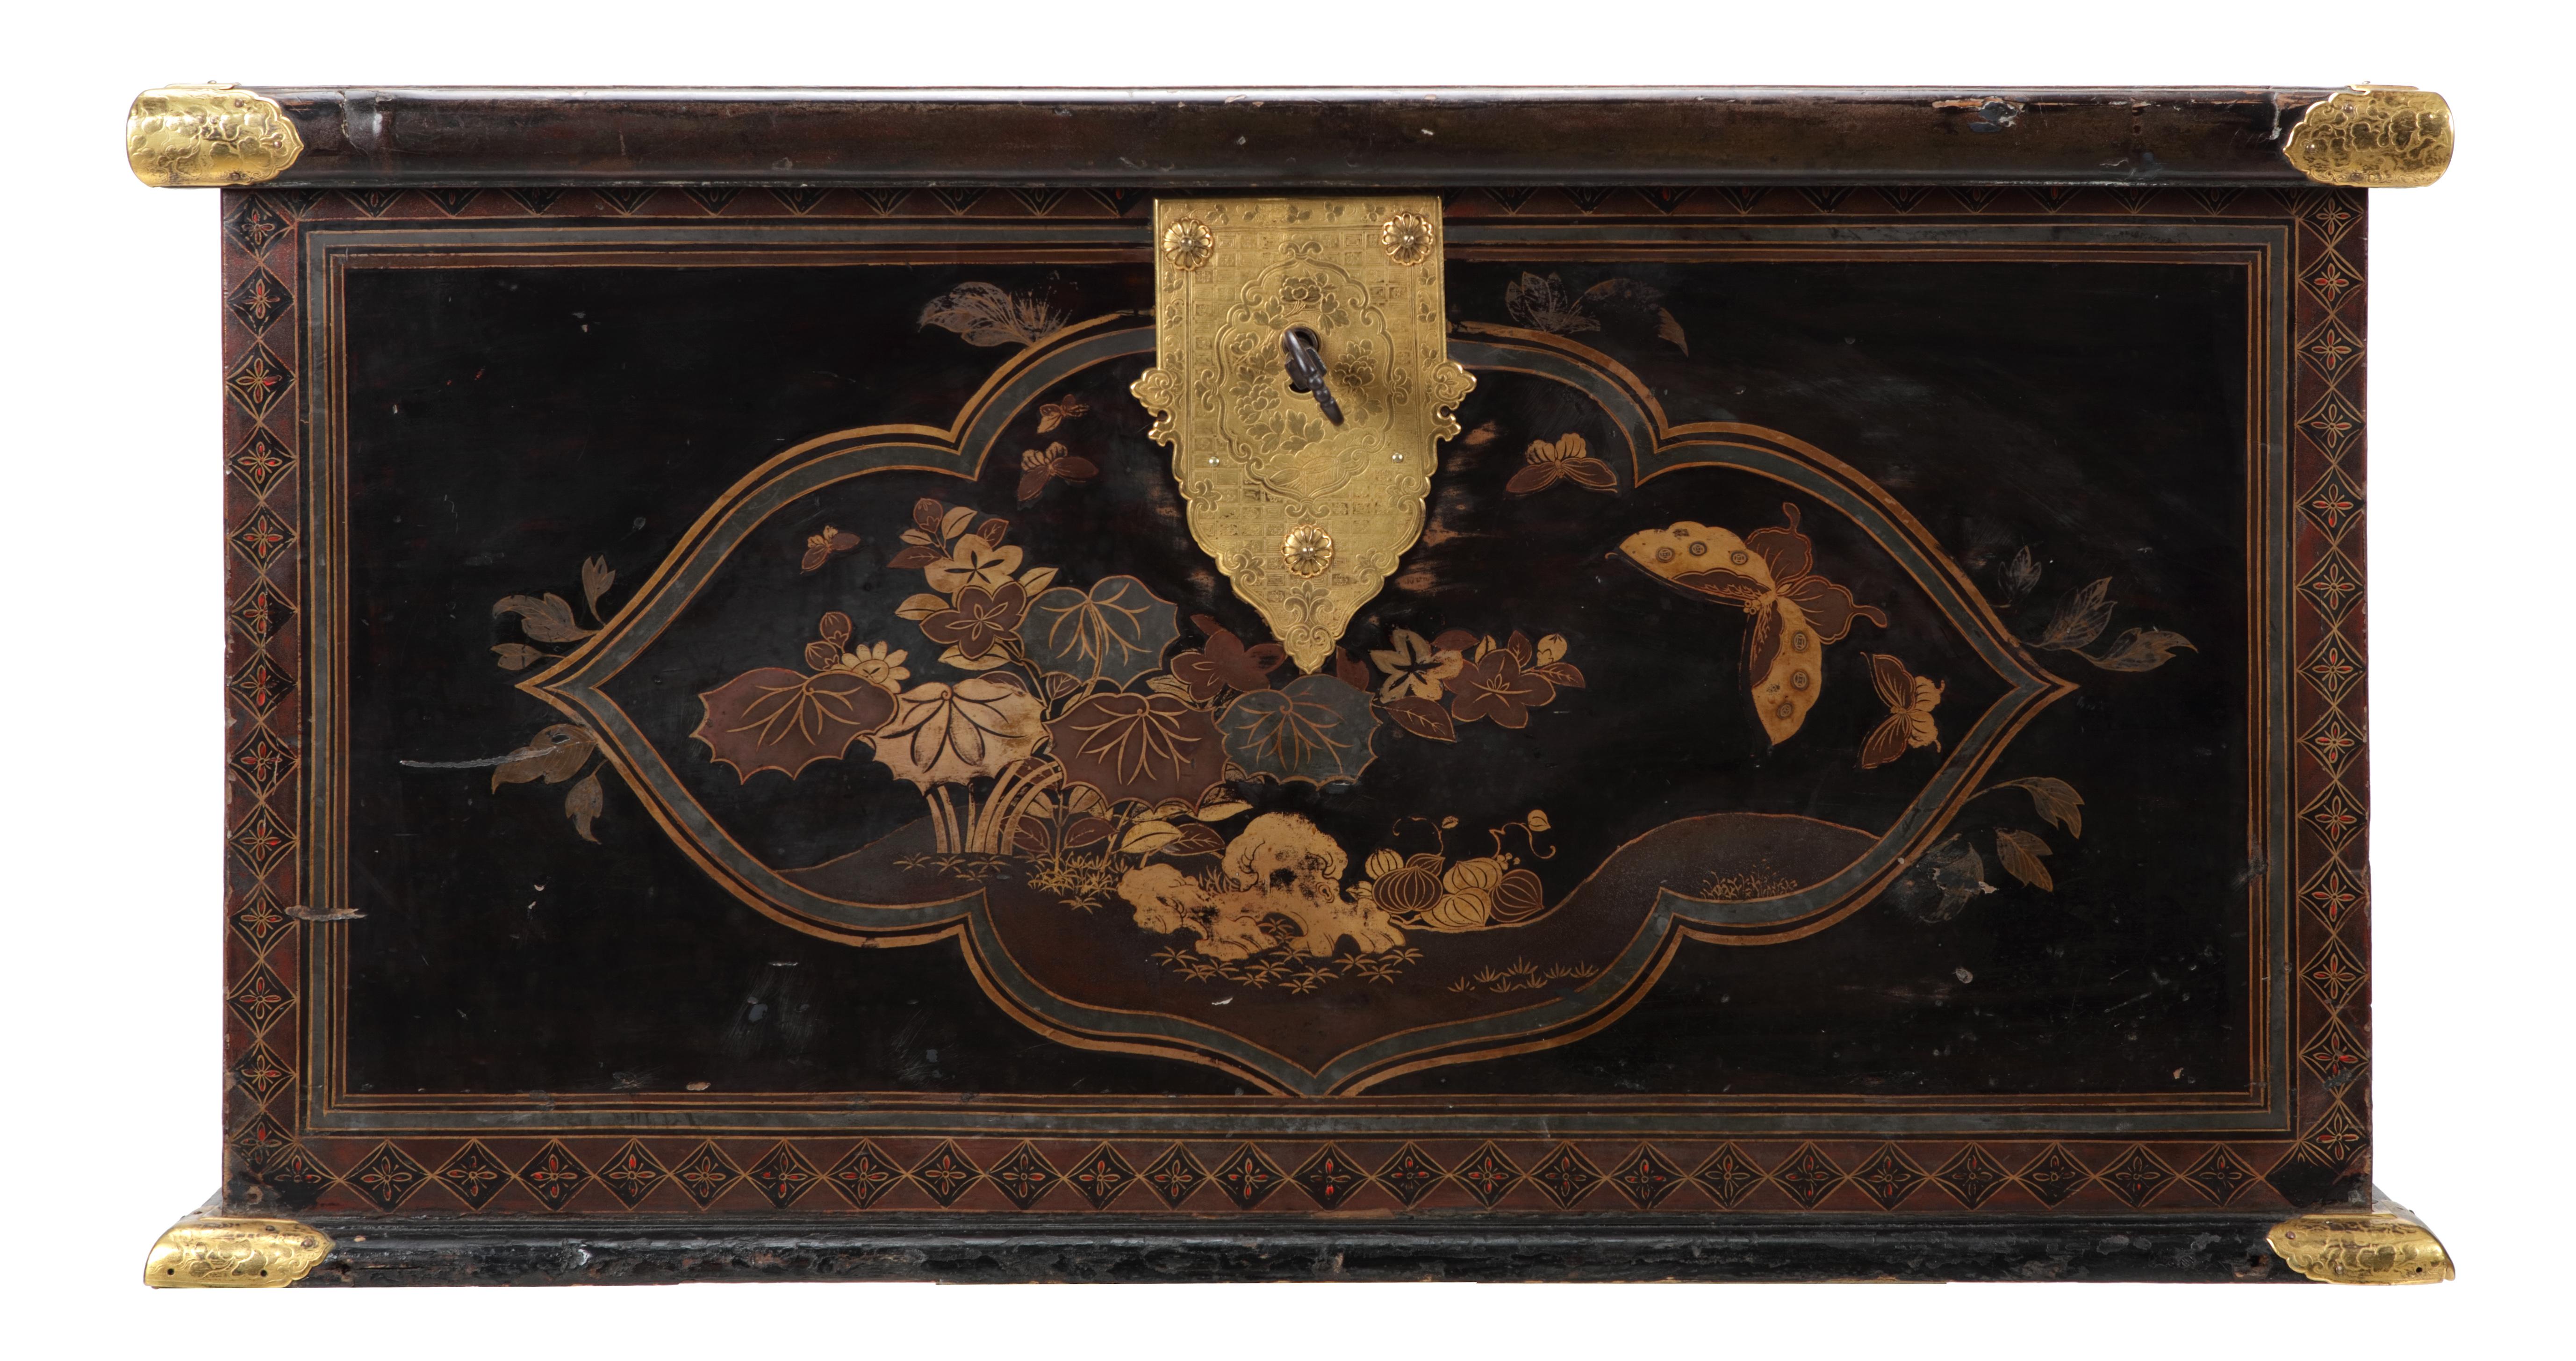 A large Japanese transitional lacquer chest with gilt-metal mounts

Edo period, early 17th century

The rectangular chest with flat hinged lid decorated in gold, silver, and red lacquer, hiramaki-e, takamaki-e, kirikane and nashiji, the top